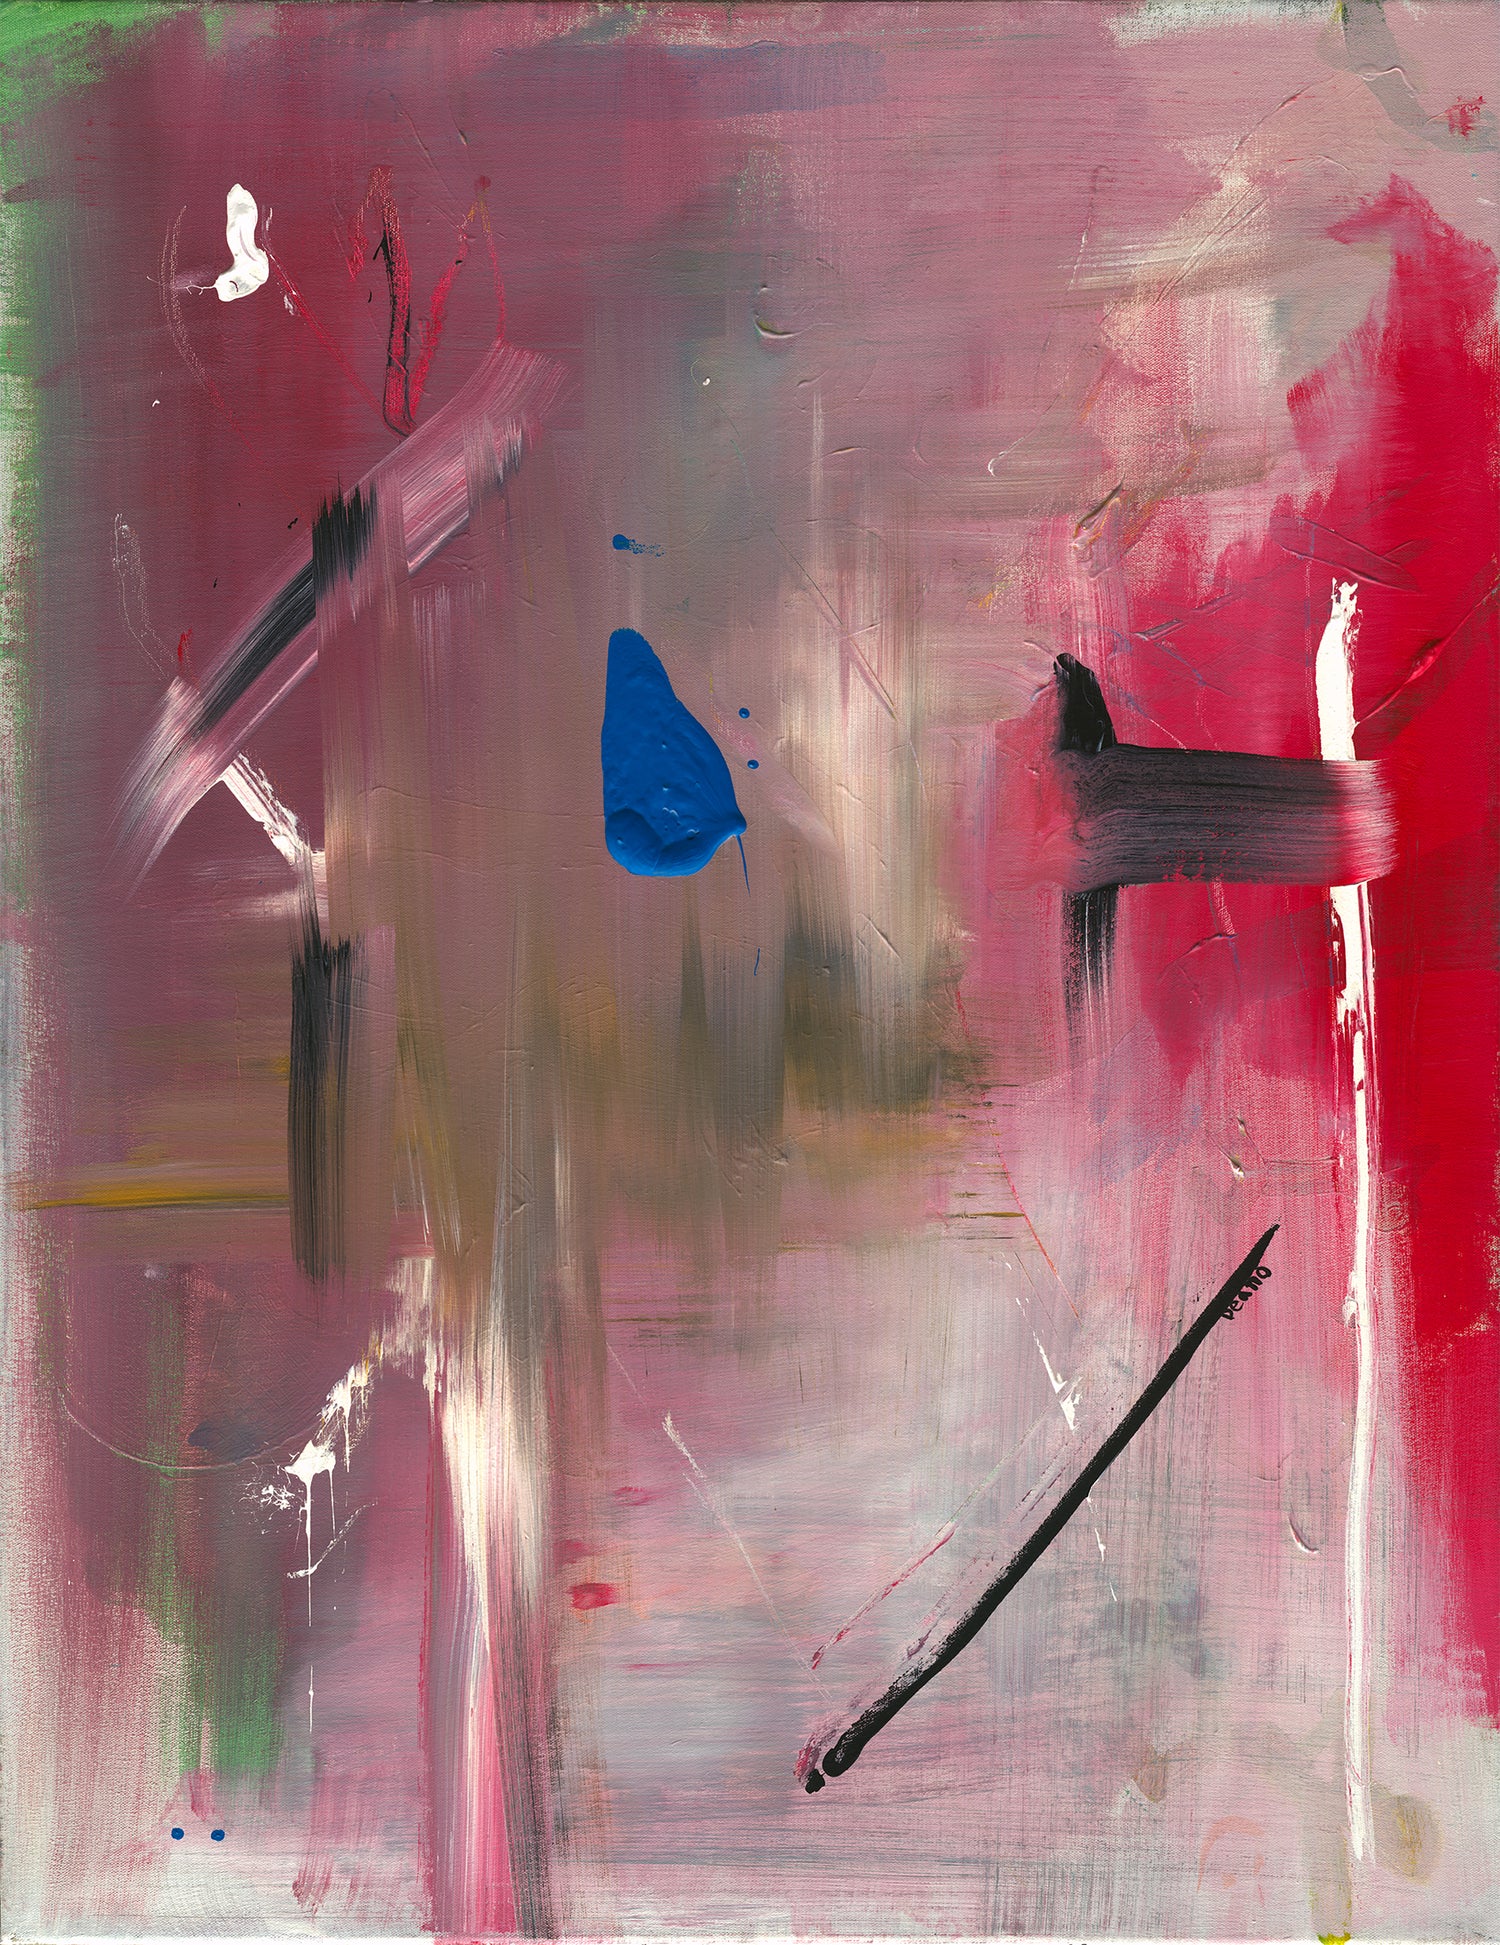 An original abstract acrylic painting on canvas featuring a dynamic composition of bold and vibrant colours. The brushstrokes are loose and energetic, creating a sense of movement and depth. The painting is dominated by bright hues of blue, green and red, with splashes of white and black adding contrast. The overall effect is one of energy and emotion, making it a striking addition to any room. Deano Hewitts - 2017